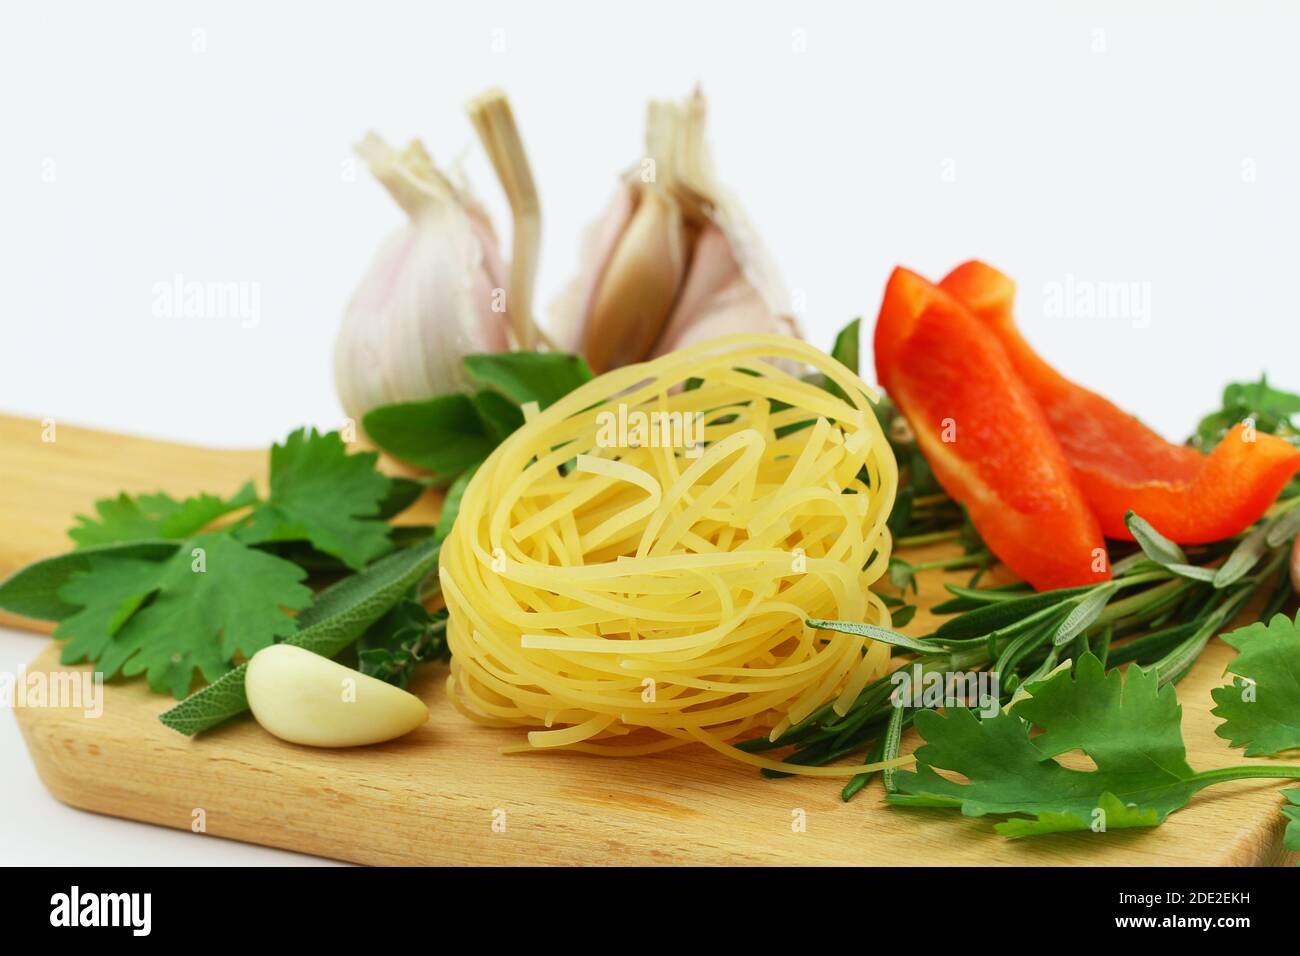 Closeup of uncooked tagliatelle, fresh herbs, garlic and red pepper on wooden surface Stock Photo